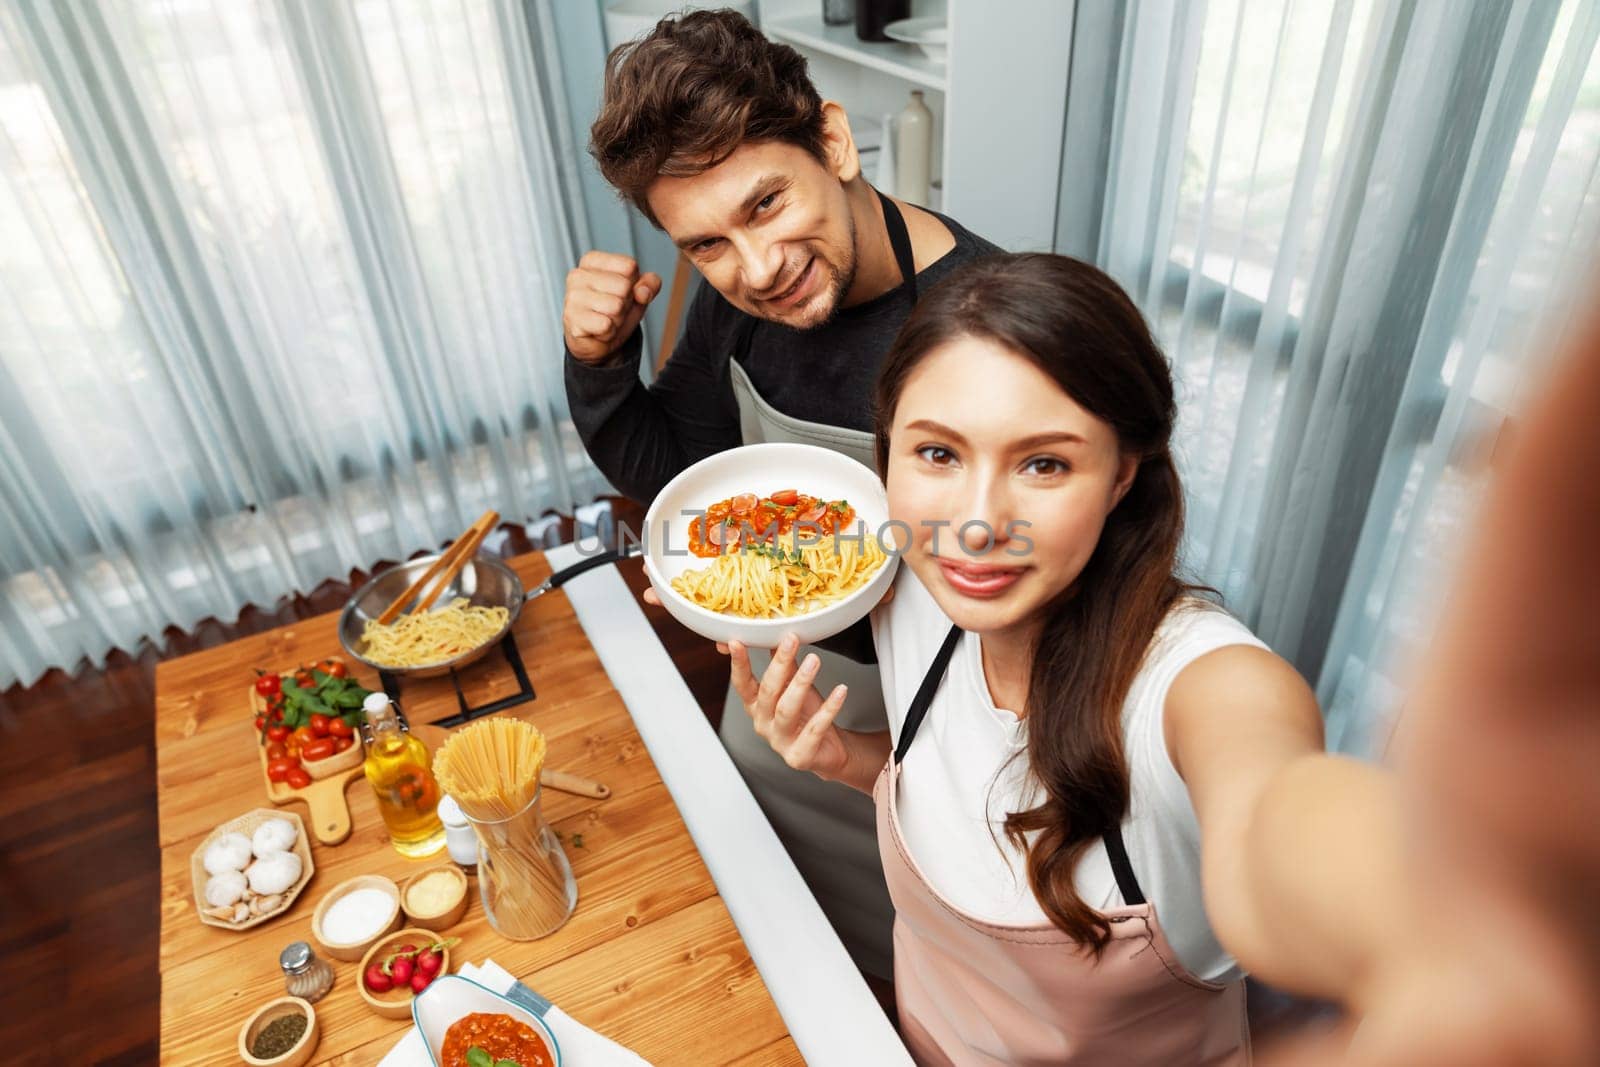 Making photo selfie couple influencers completely cookied spaghetti. Postulate. by biancoblue